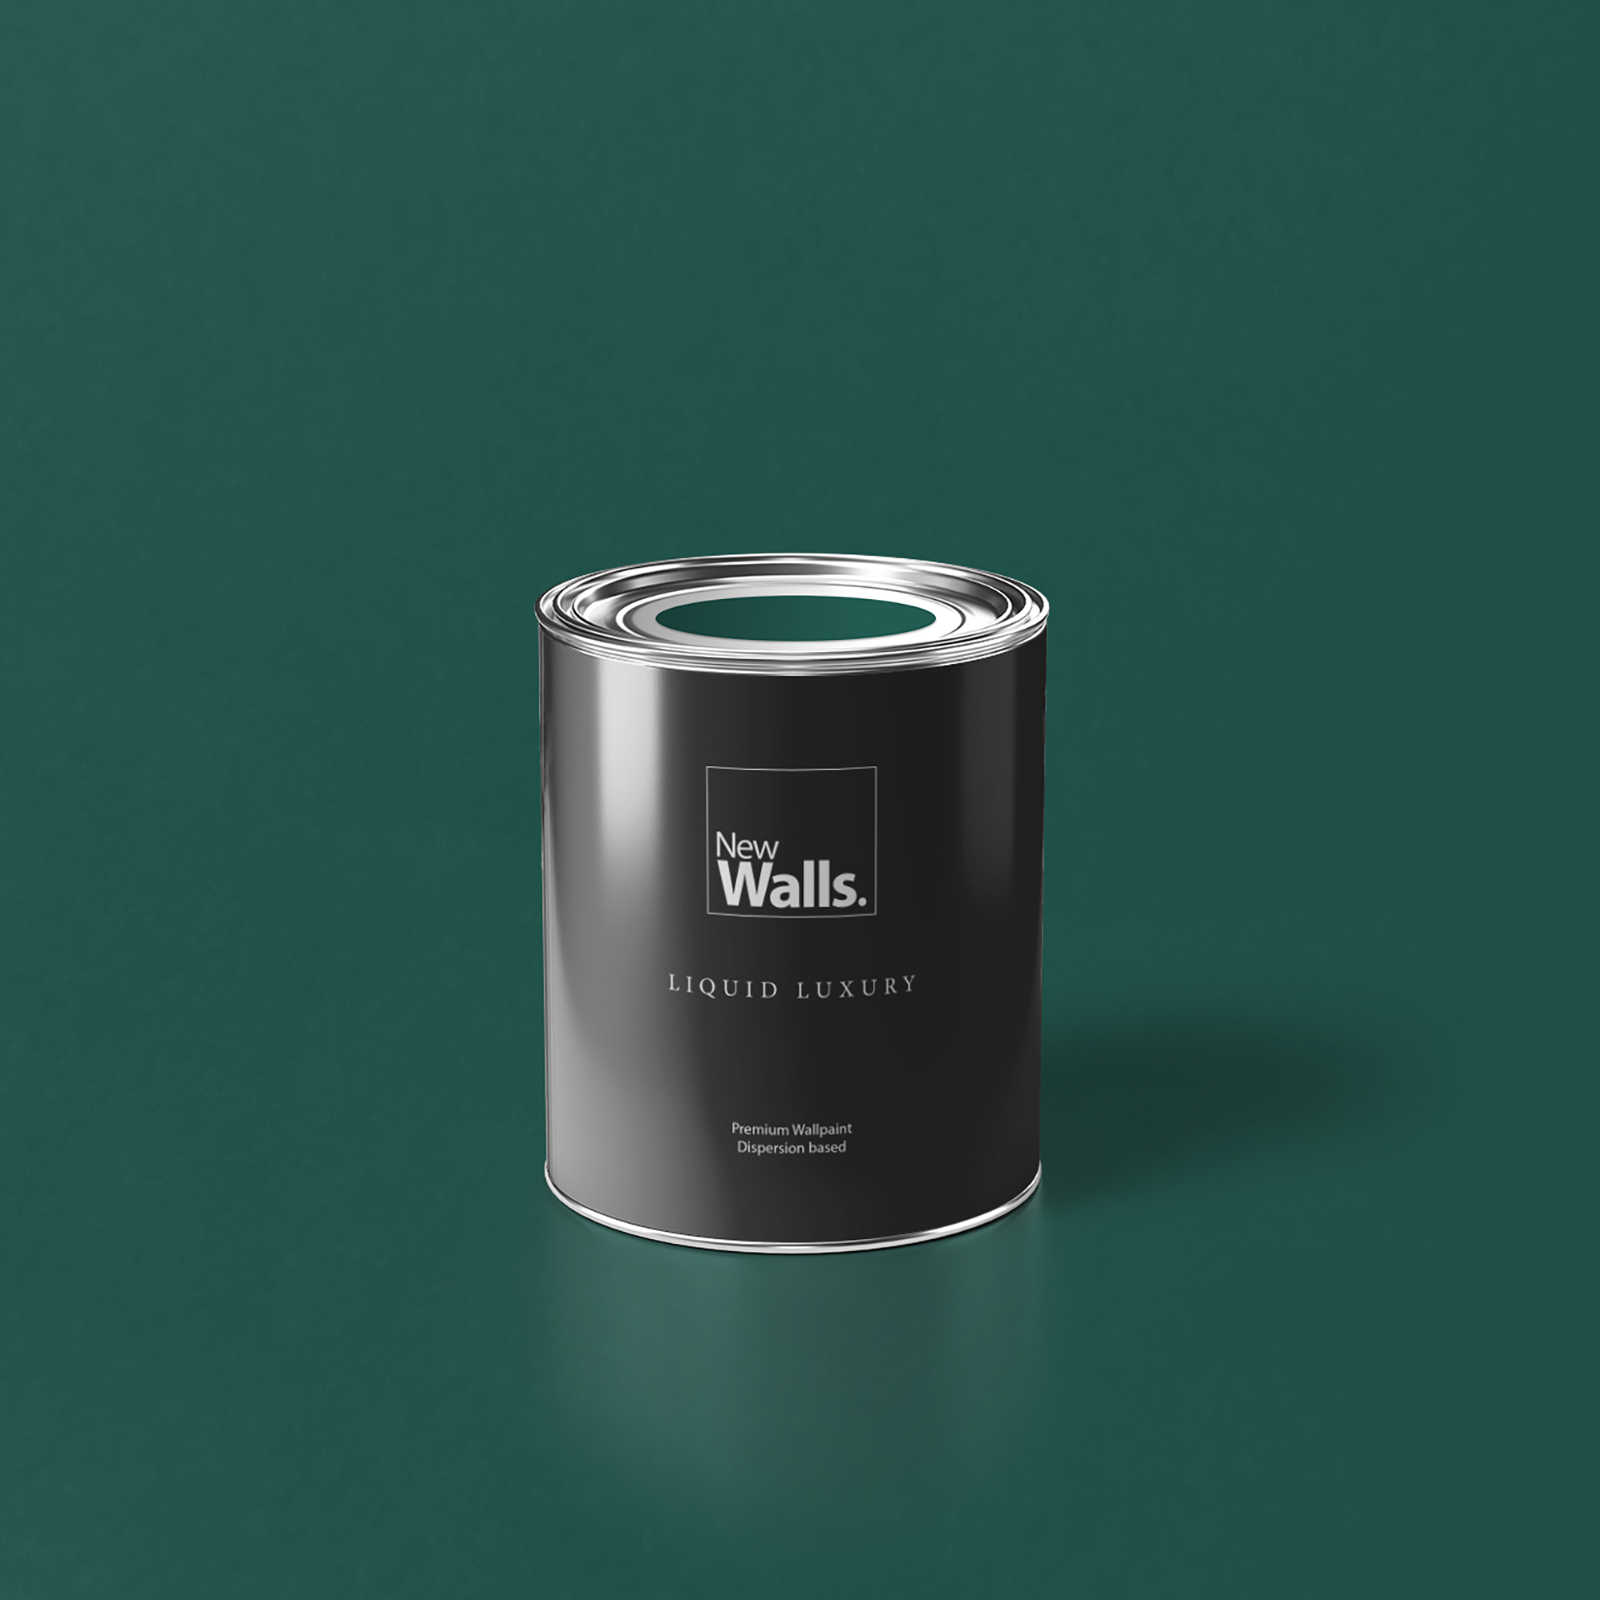         Premium Wall Paint gorgeous emerald green »Expressive Emerald« NW412 – 1 litre
    